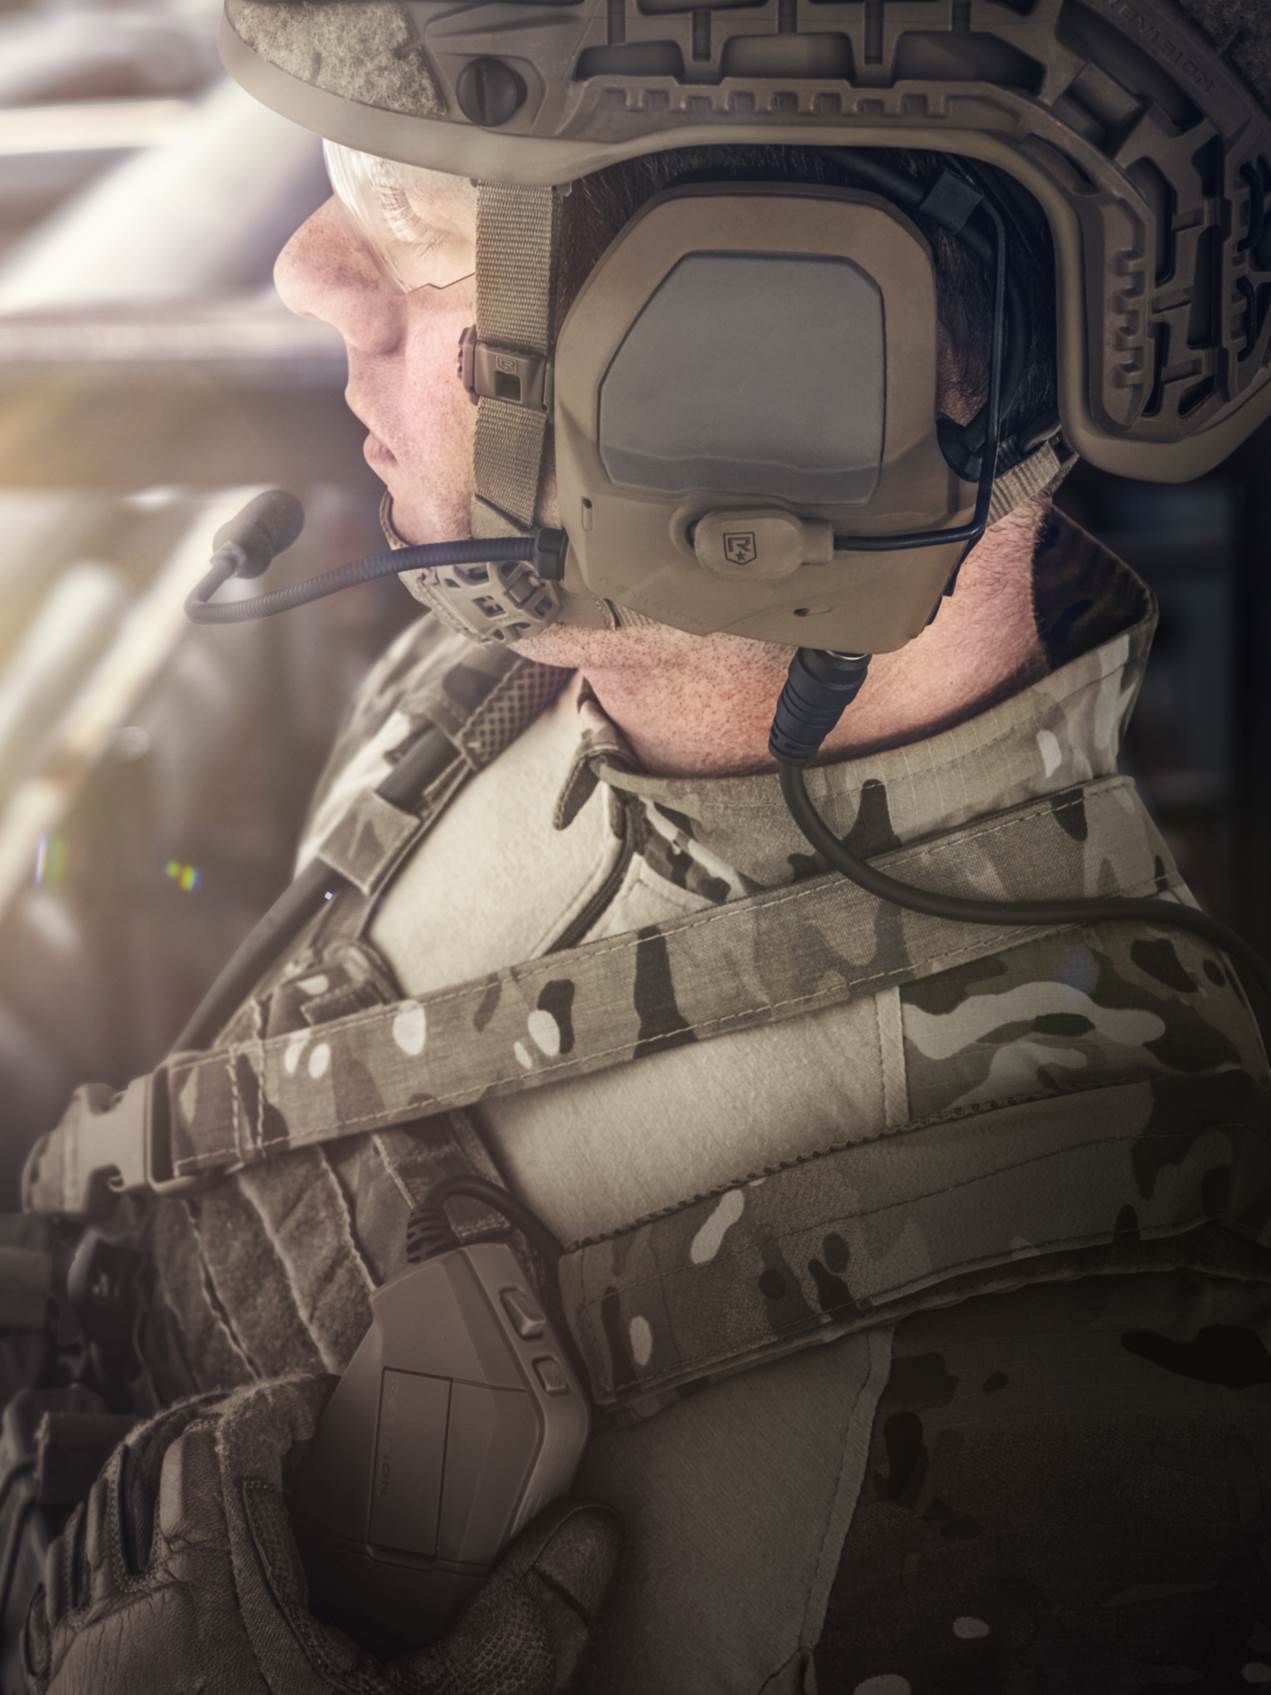 Revision’s new SenSys ComCentr2 Tactical Headset System includes the slim-profile circumaural headset and advanced Human Interface Device.